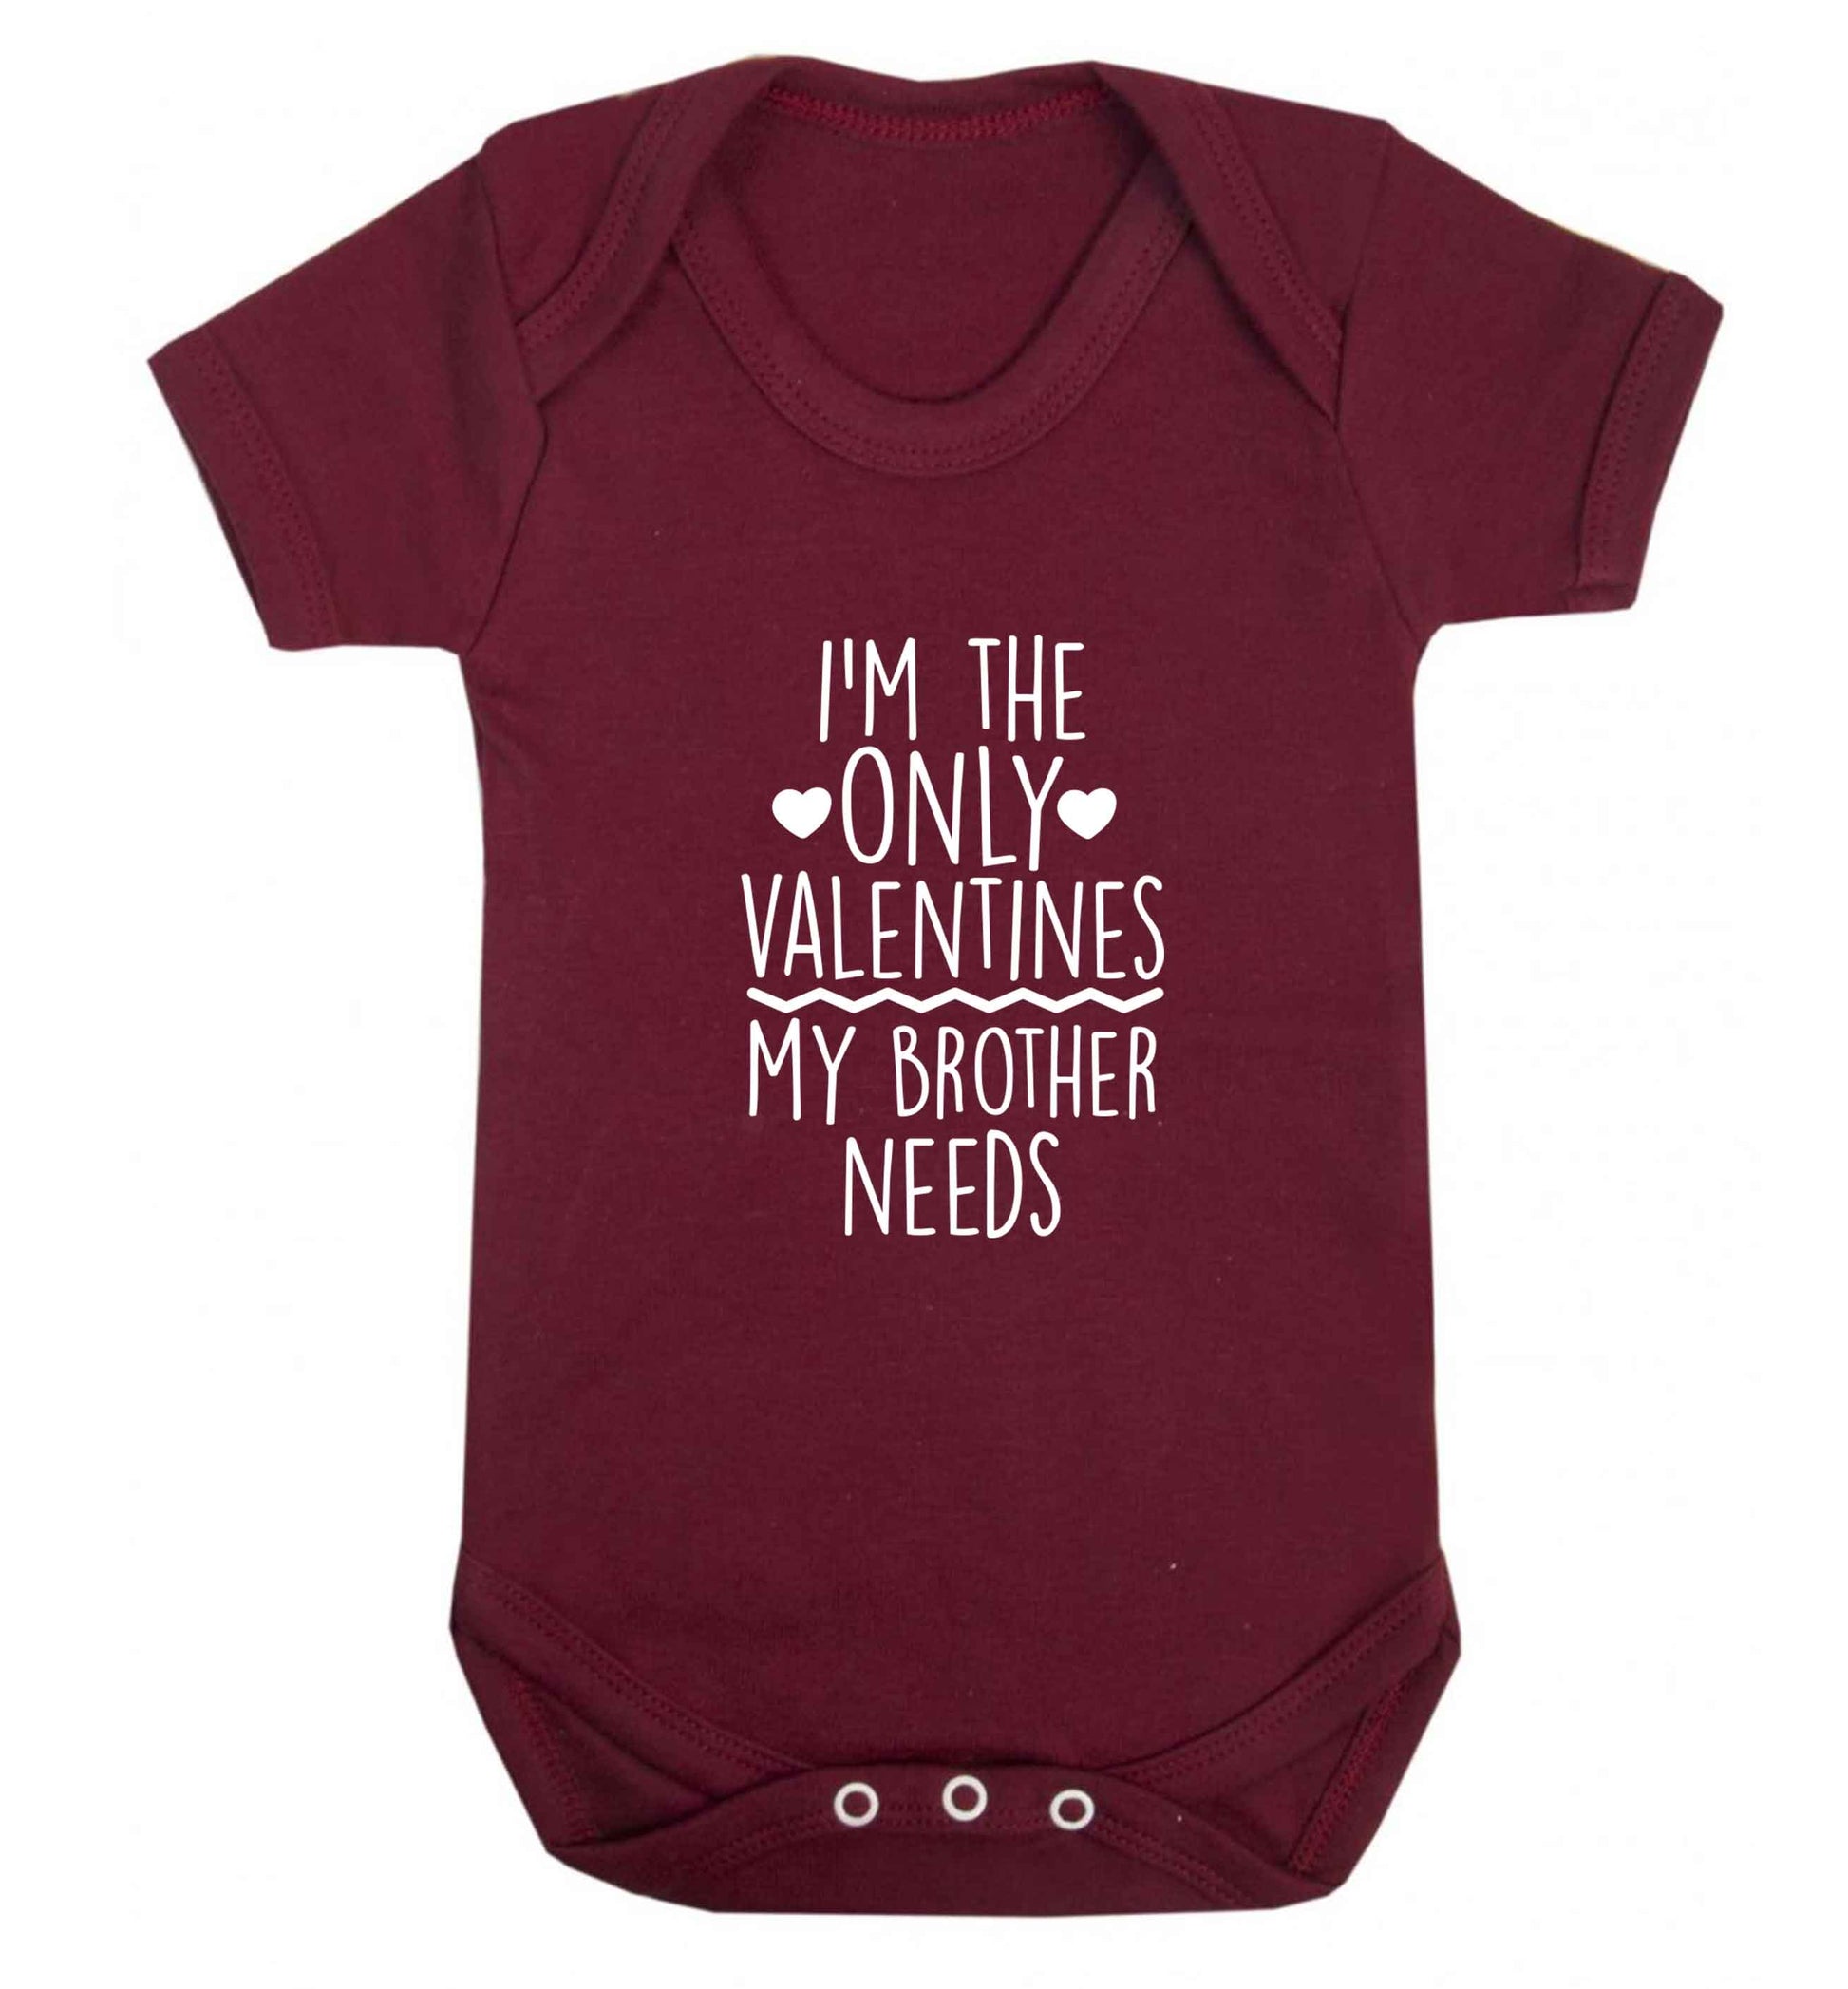 I'm the only valentines my brother needs baby vest maroon 18-24 months